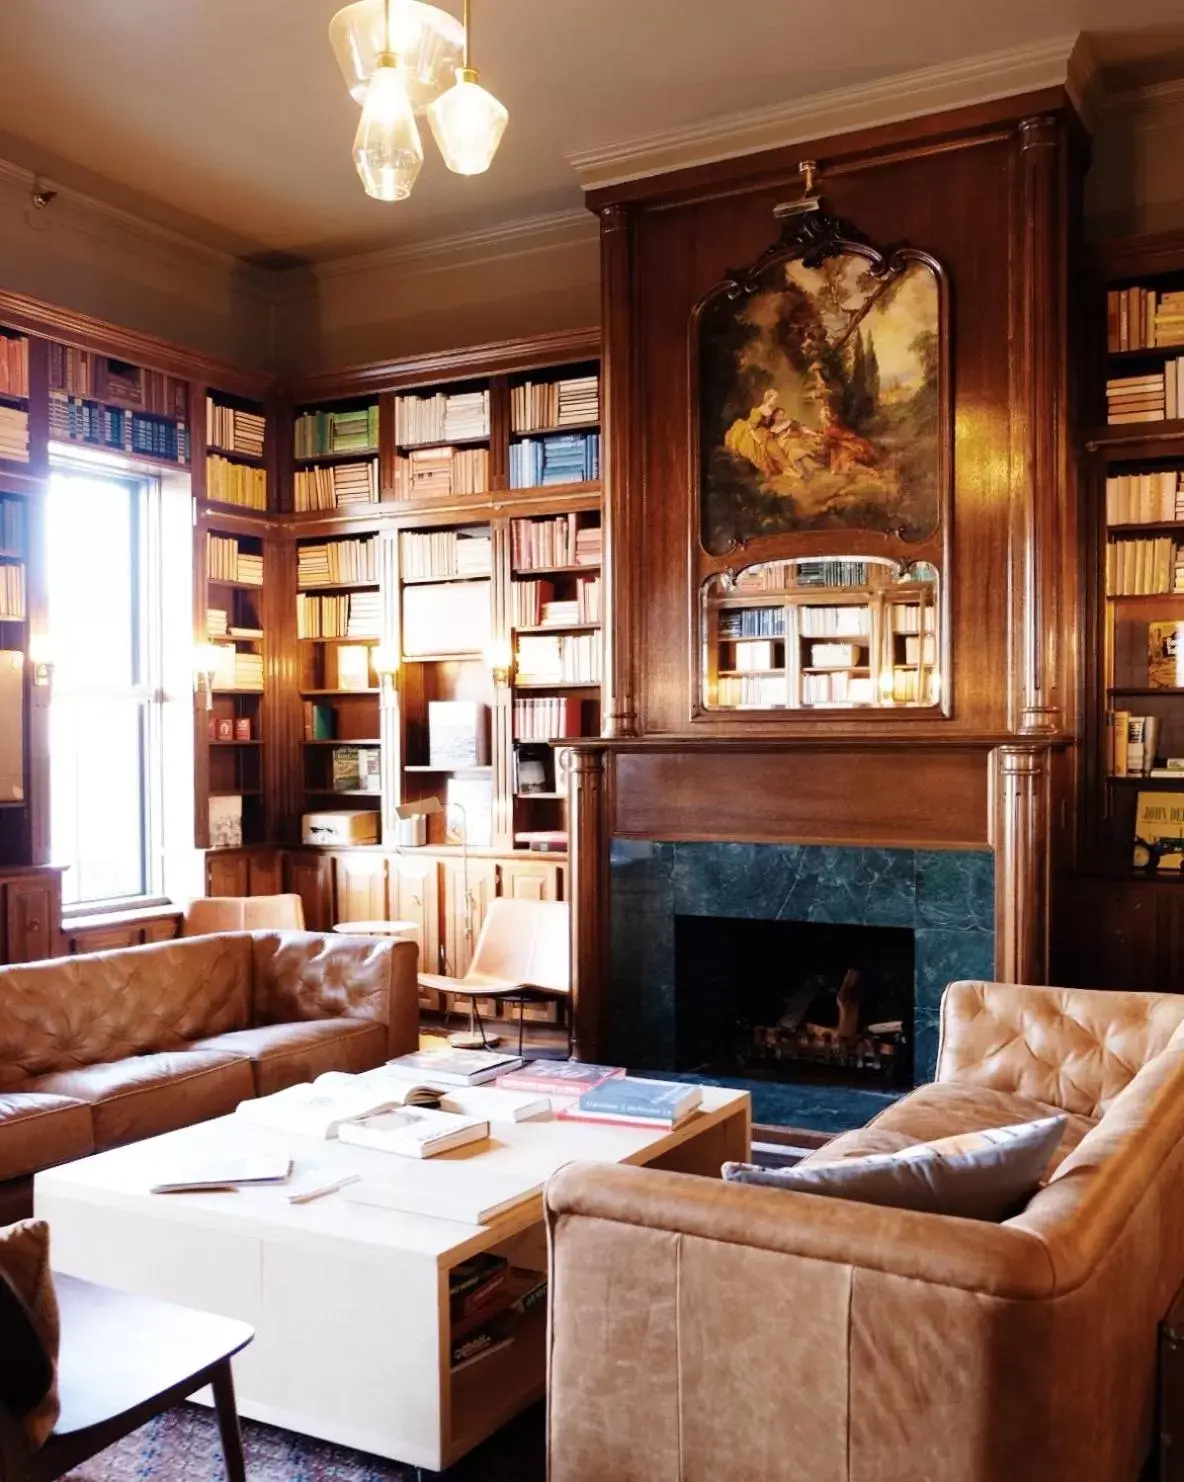 Library in Thatcher Hotel